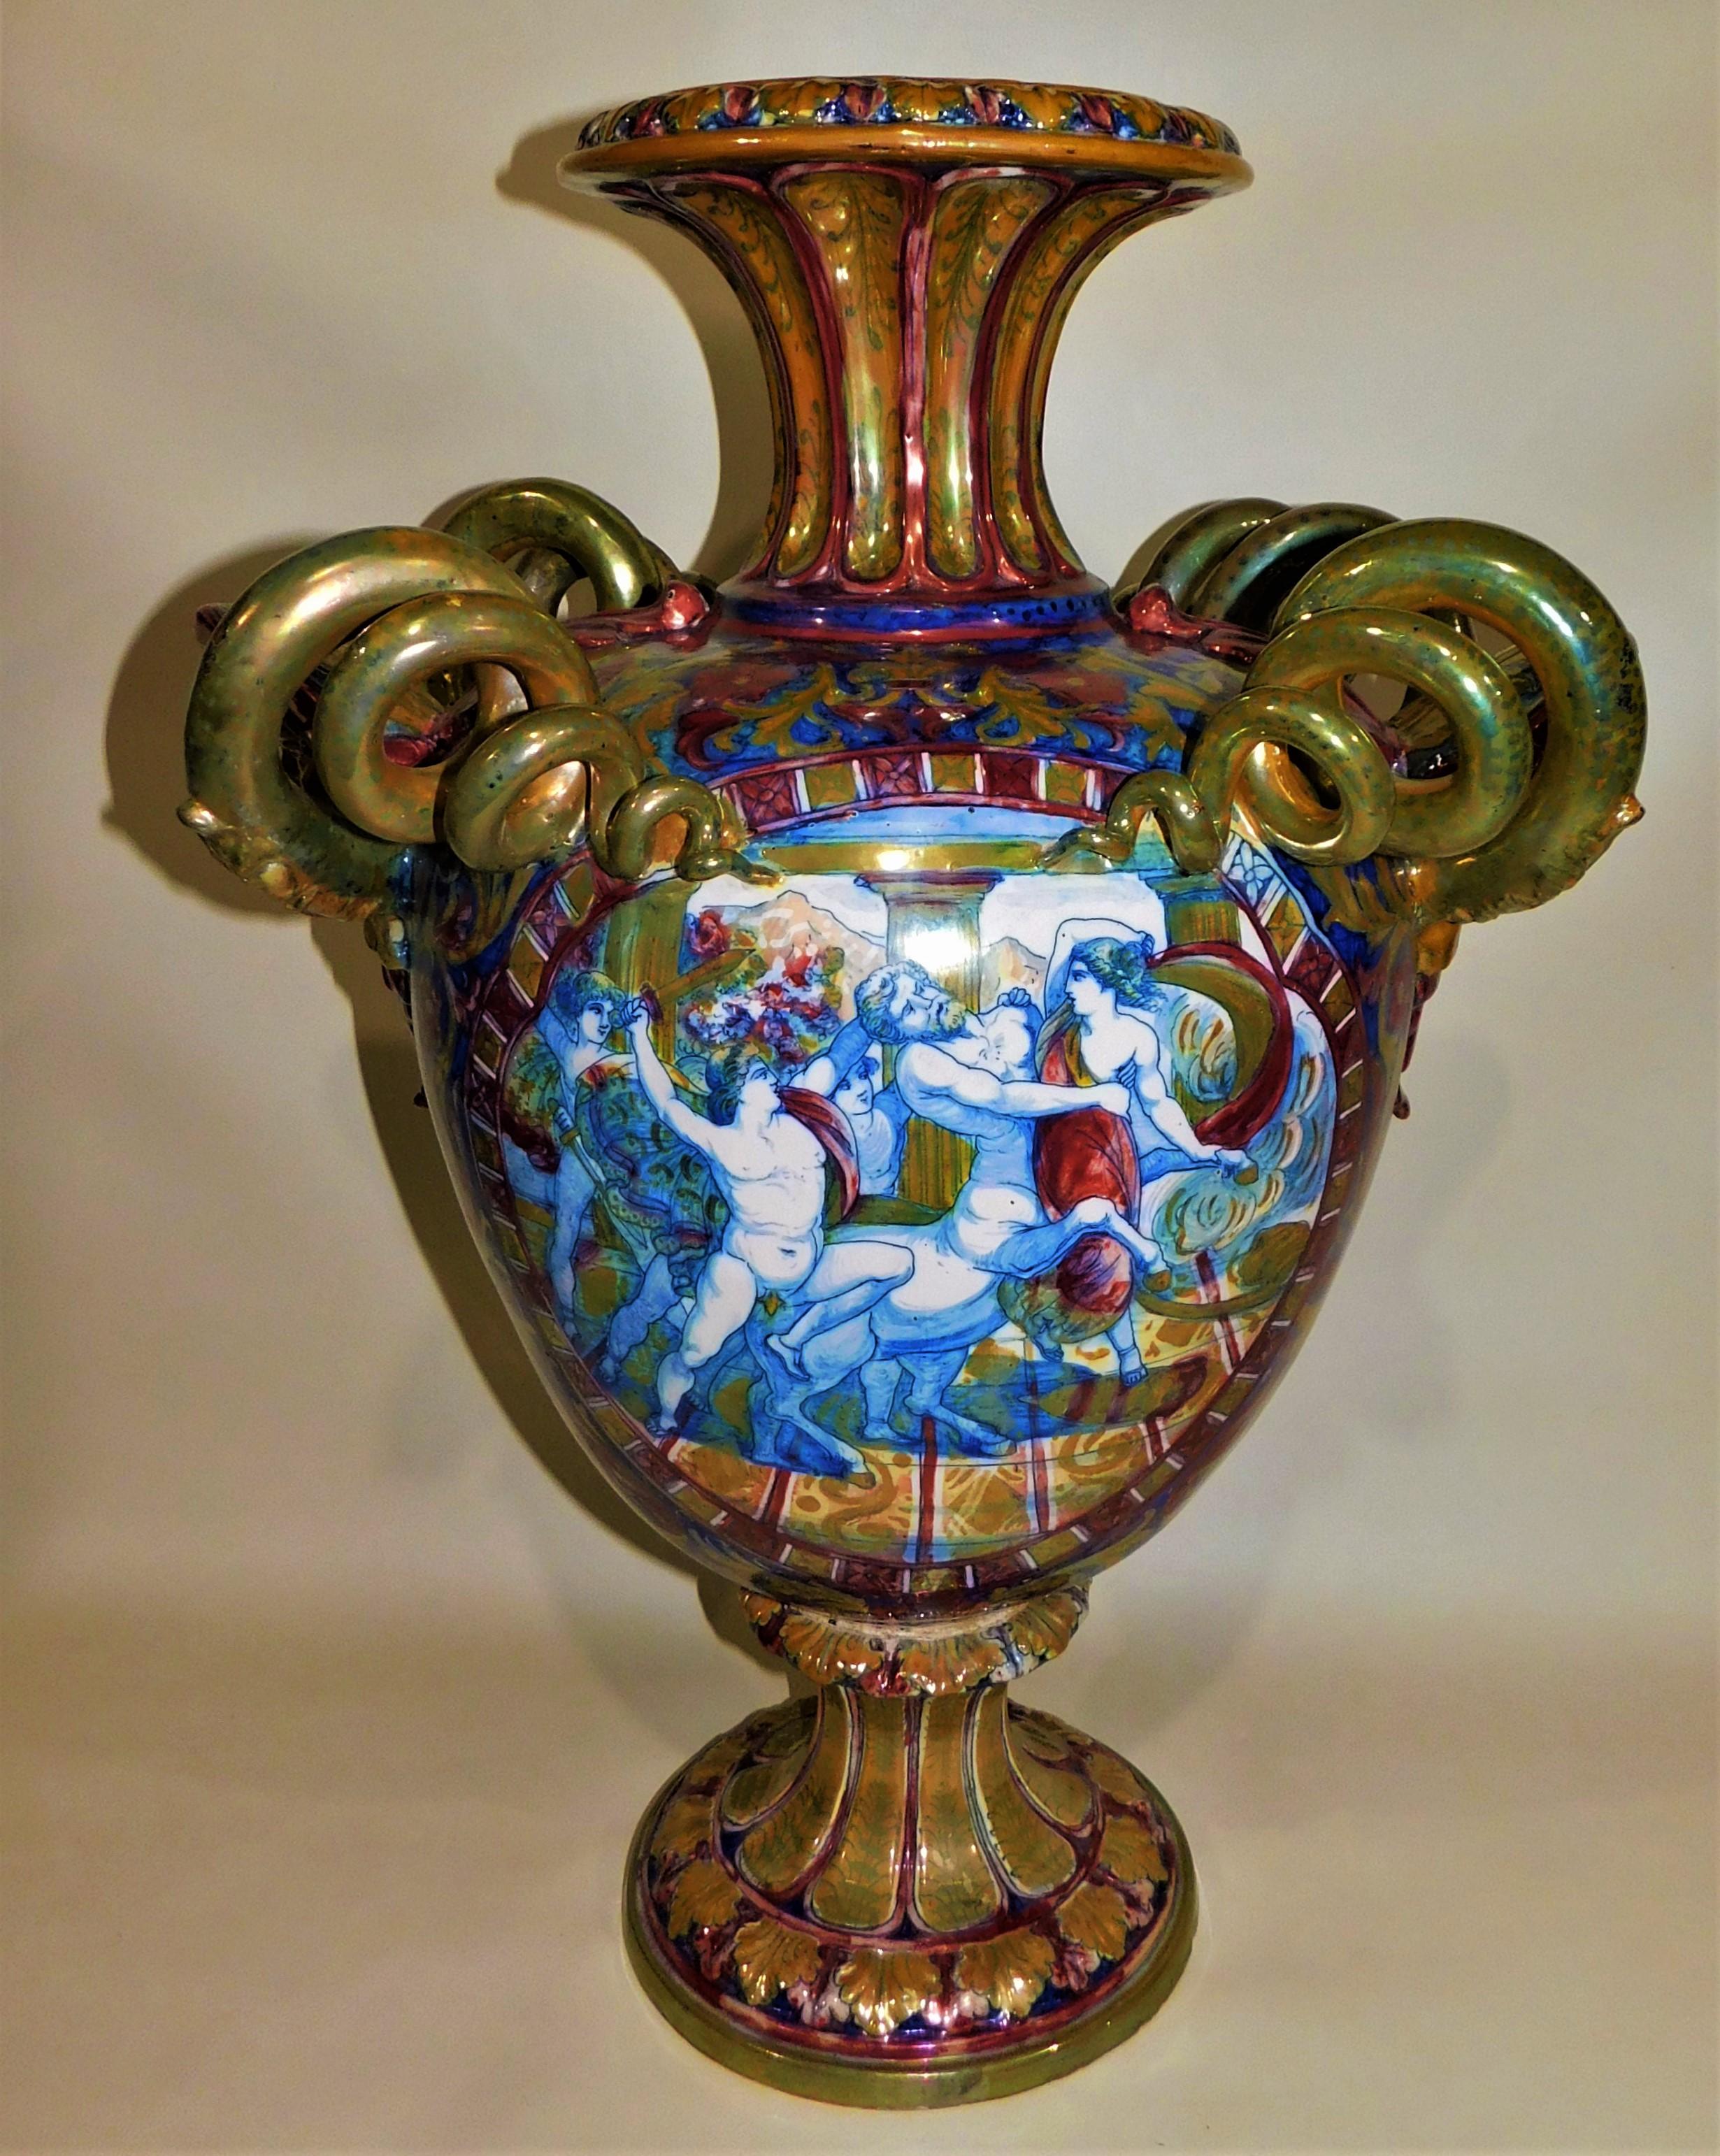 From Italy, this imposing antique hand painted Majolica luster glazed ceramic pottery urn shaped vase with serpent like handles is over two feet high. It is mainly a figural vase in style, having beautiful hand painted with allegorical scenes within